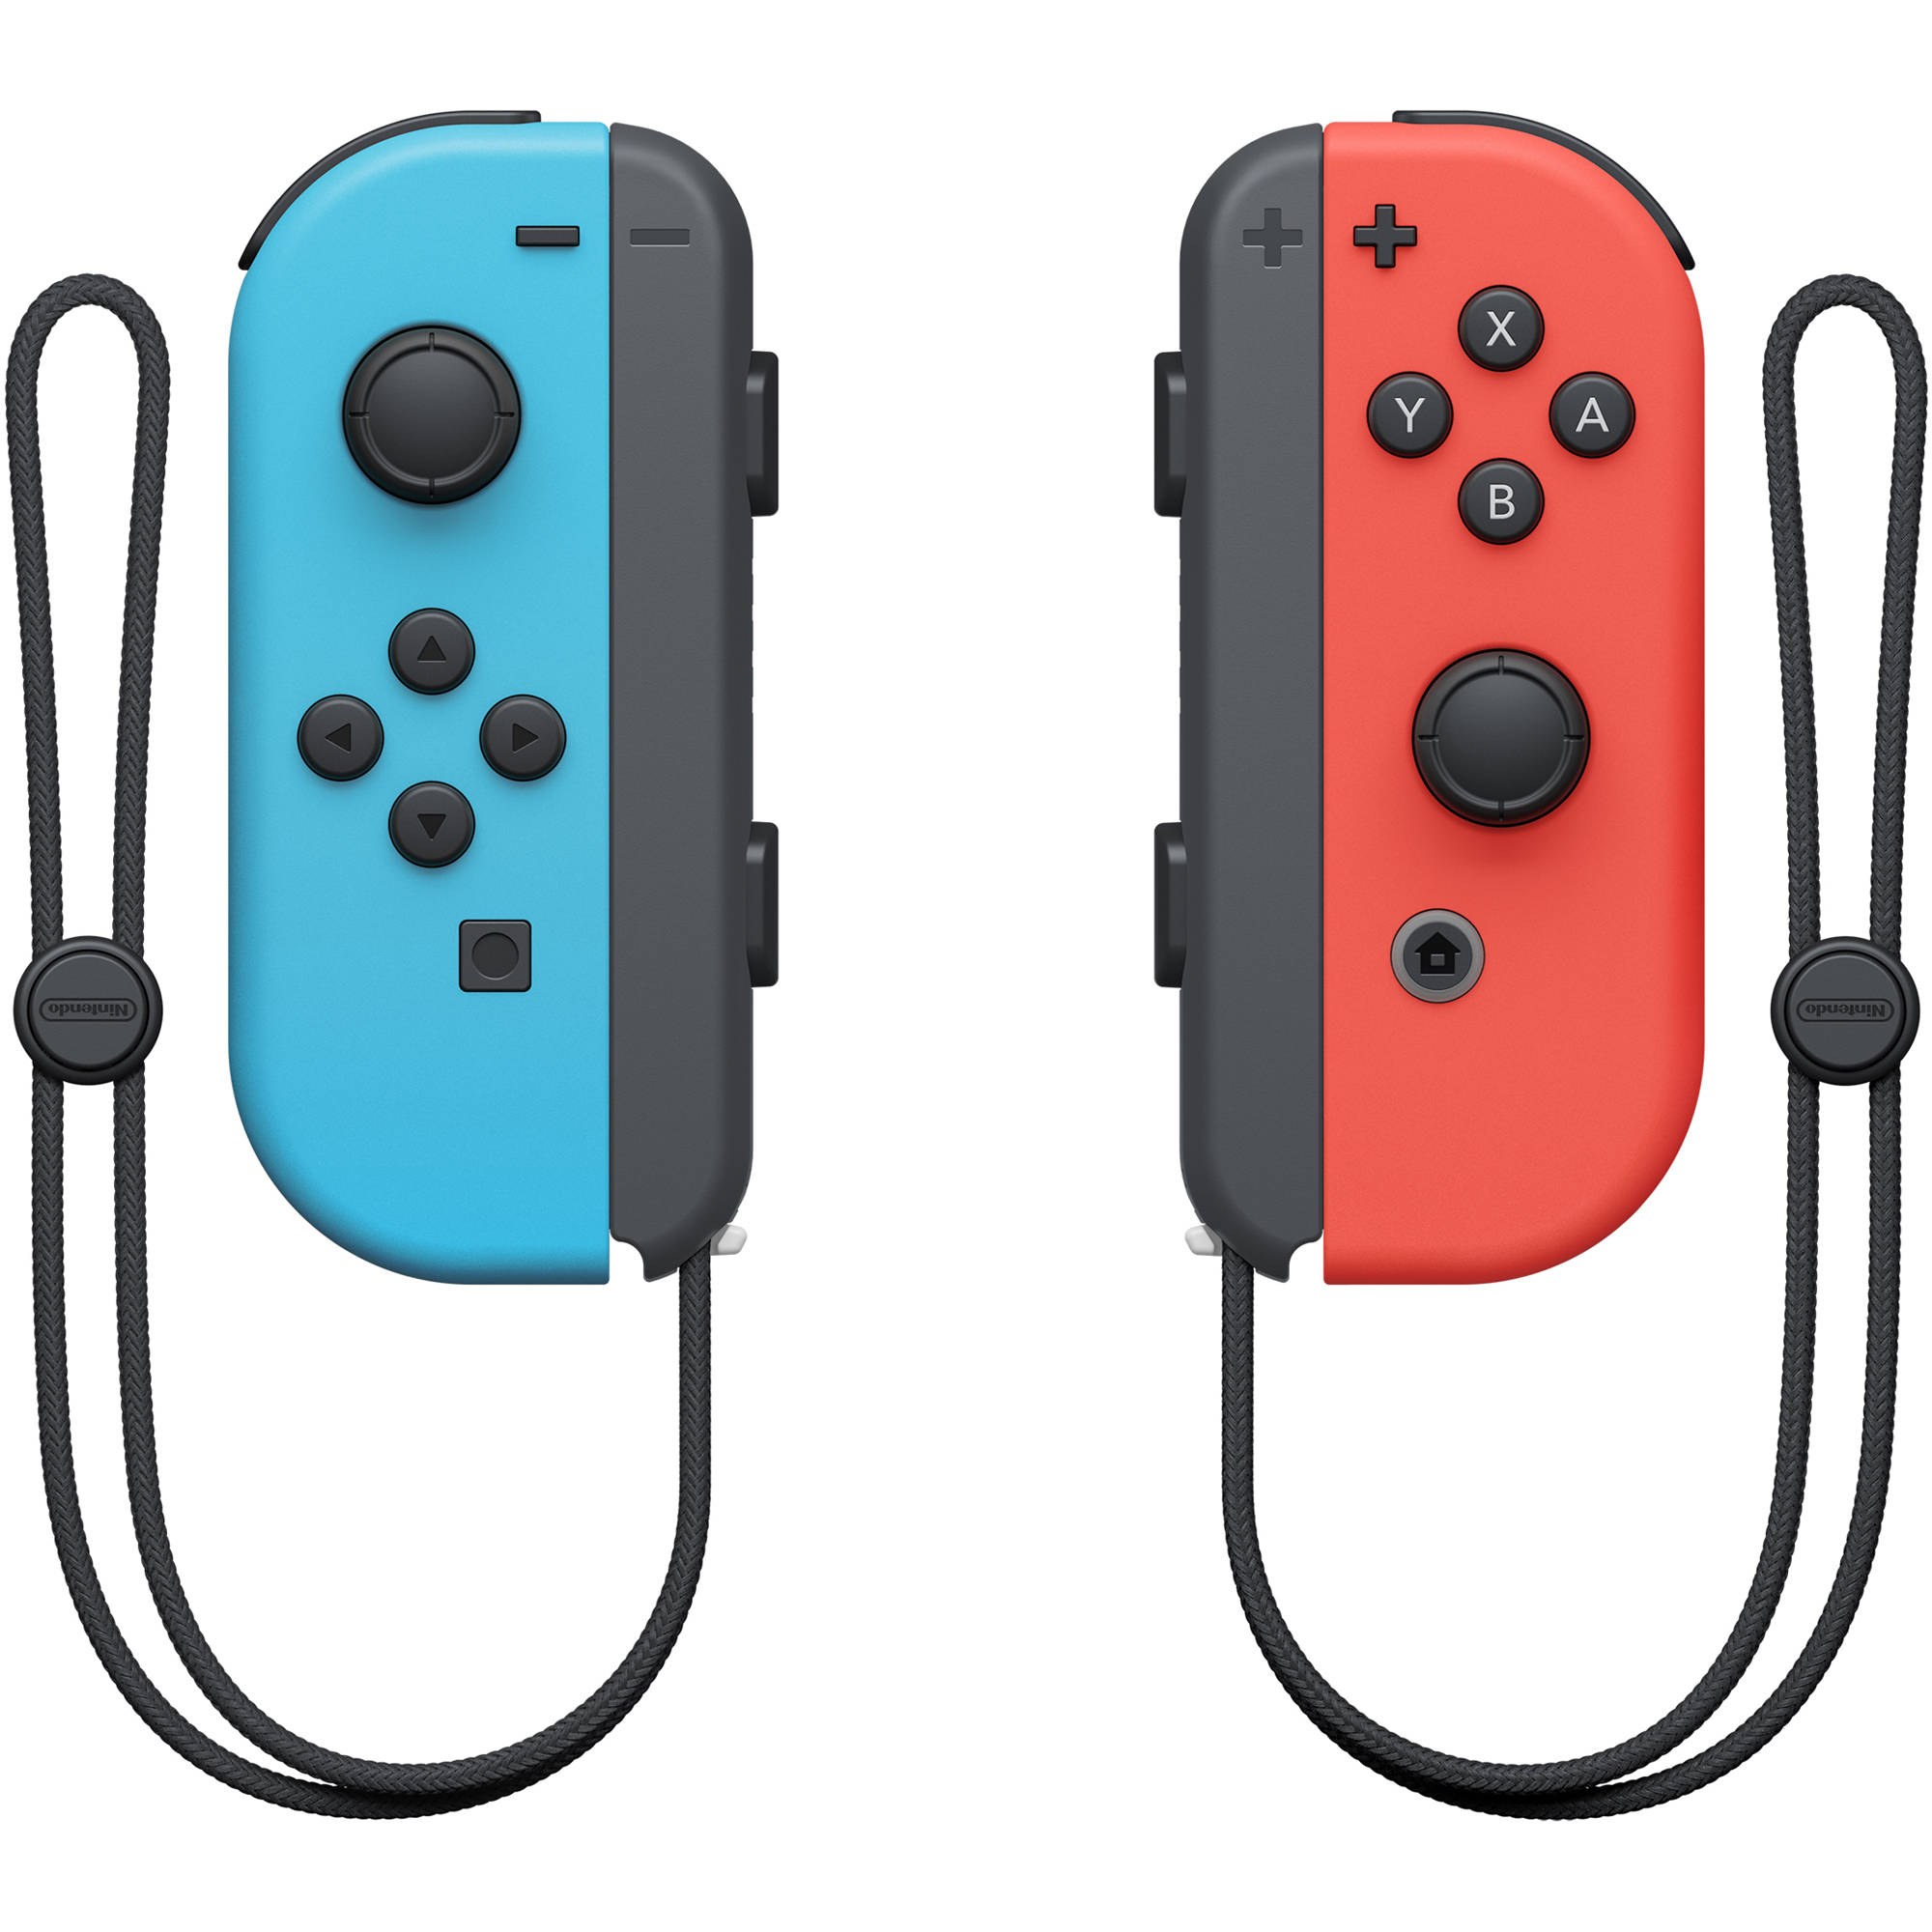 Nintendo Switch Con Wireless Original Controller Left Neon Blue OR Right Neon Red- LOOSE Pack / NO Box | Lazada Singapore